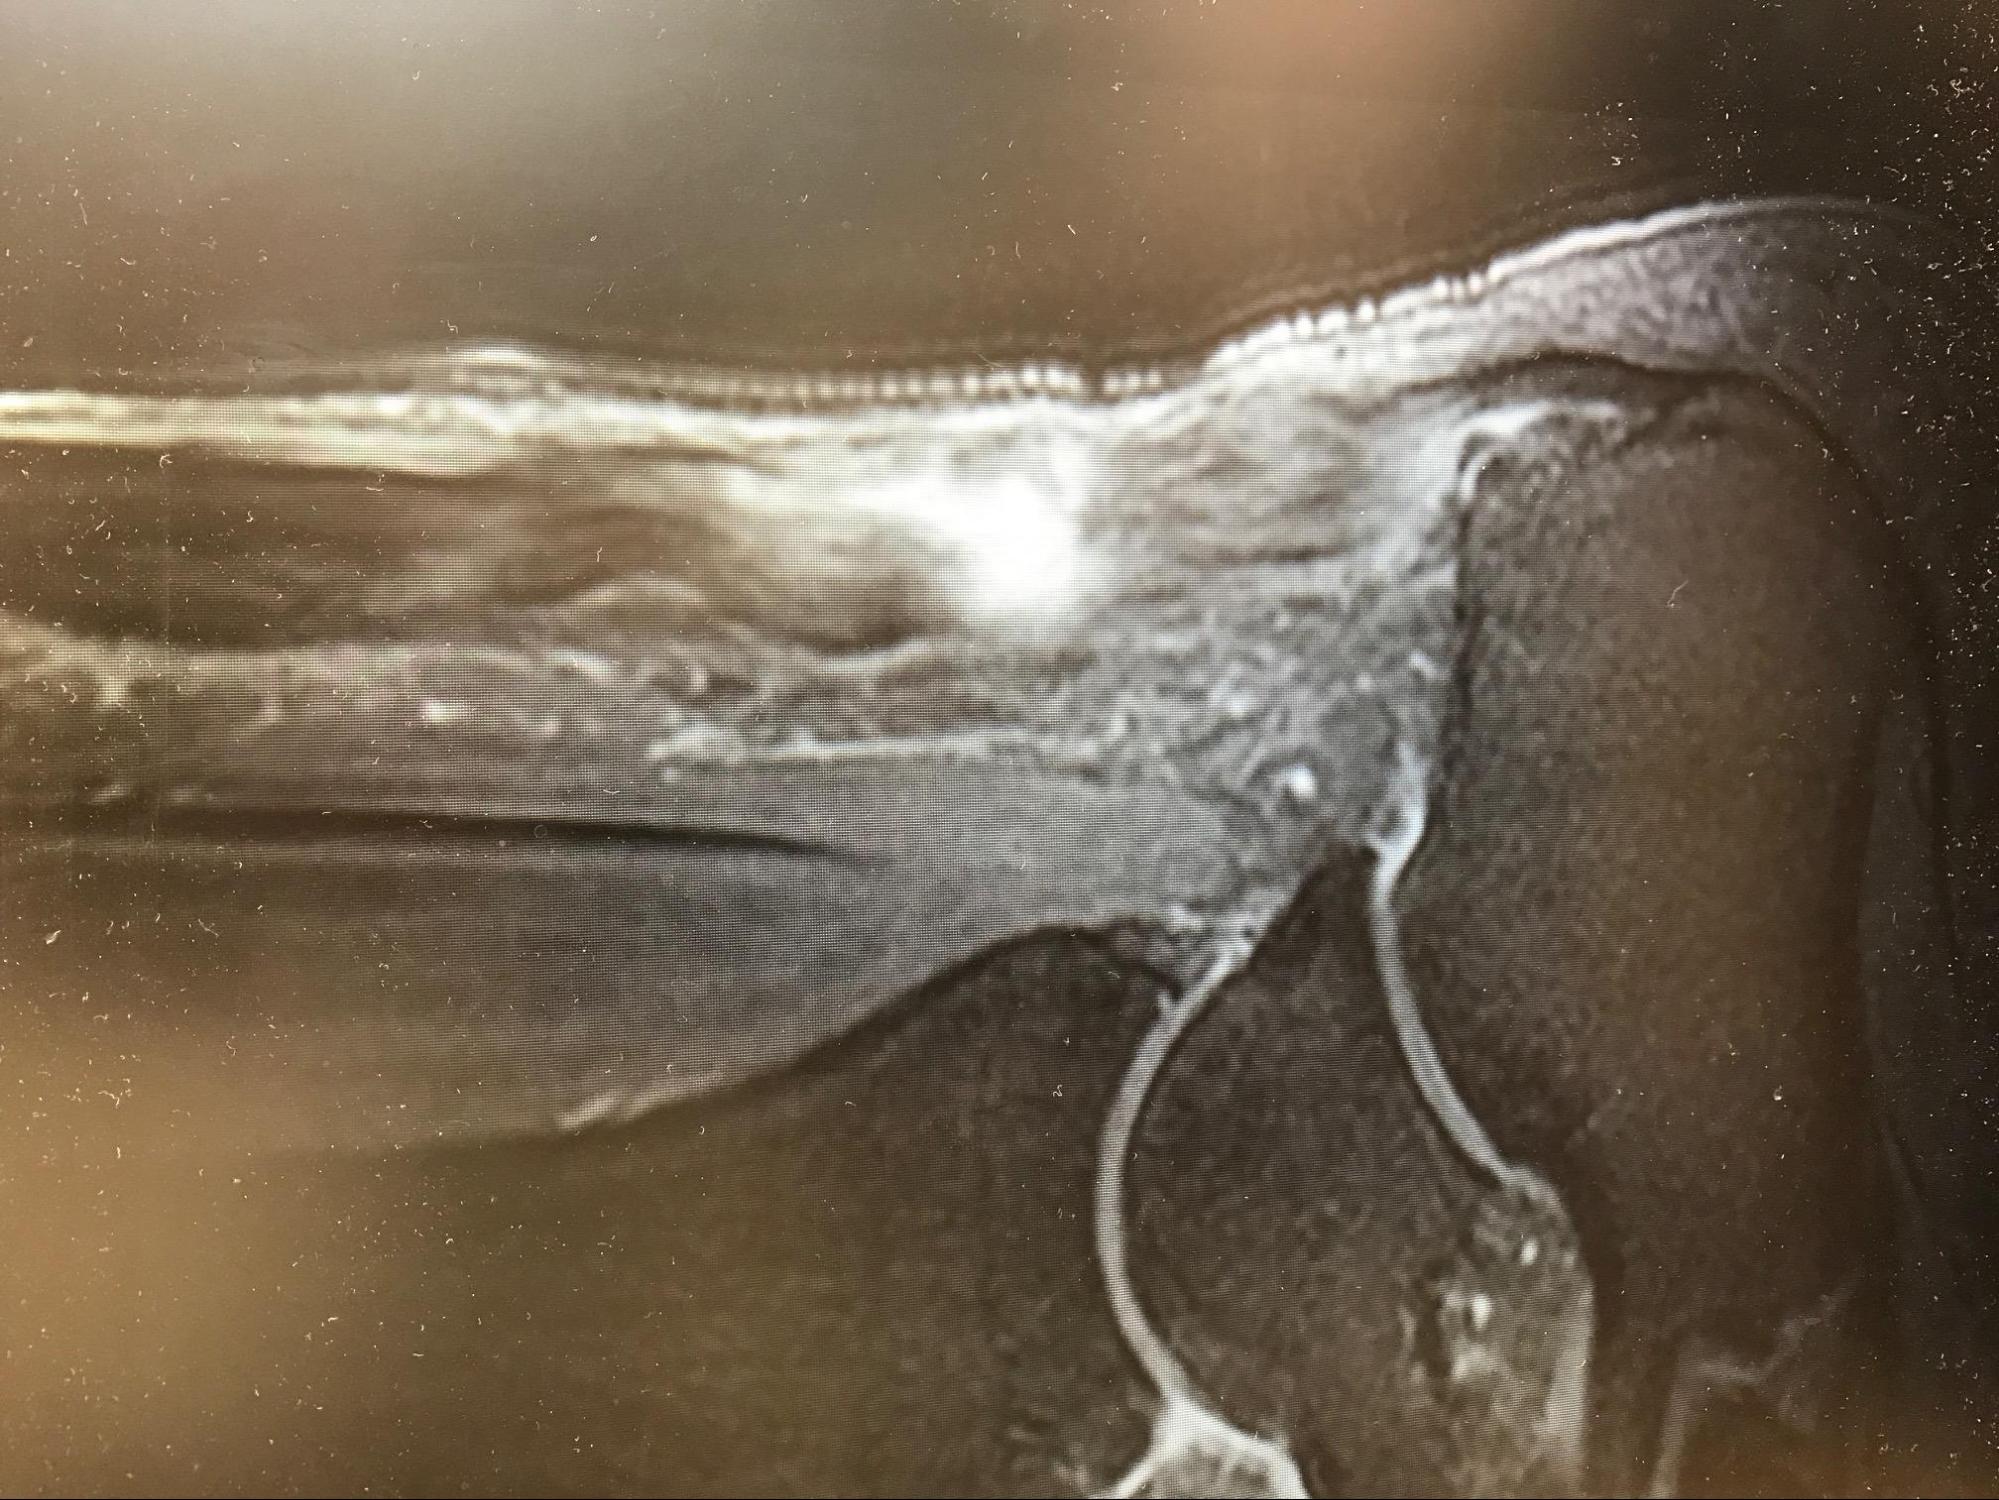 Achilles Tendon Rupture
T2 MRI demonstrating a full-thickness Achilles rupture with gapping at the classing "watershed" area.